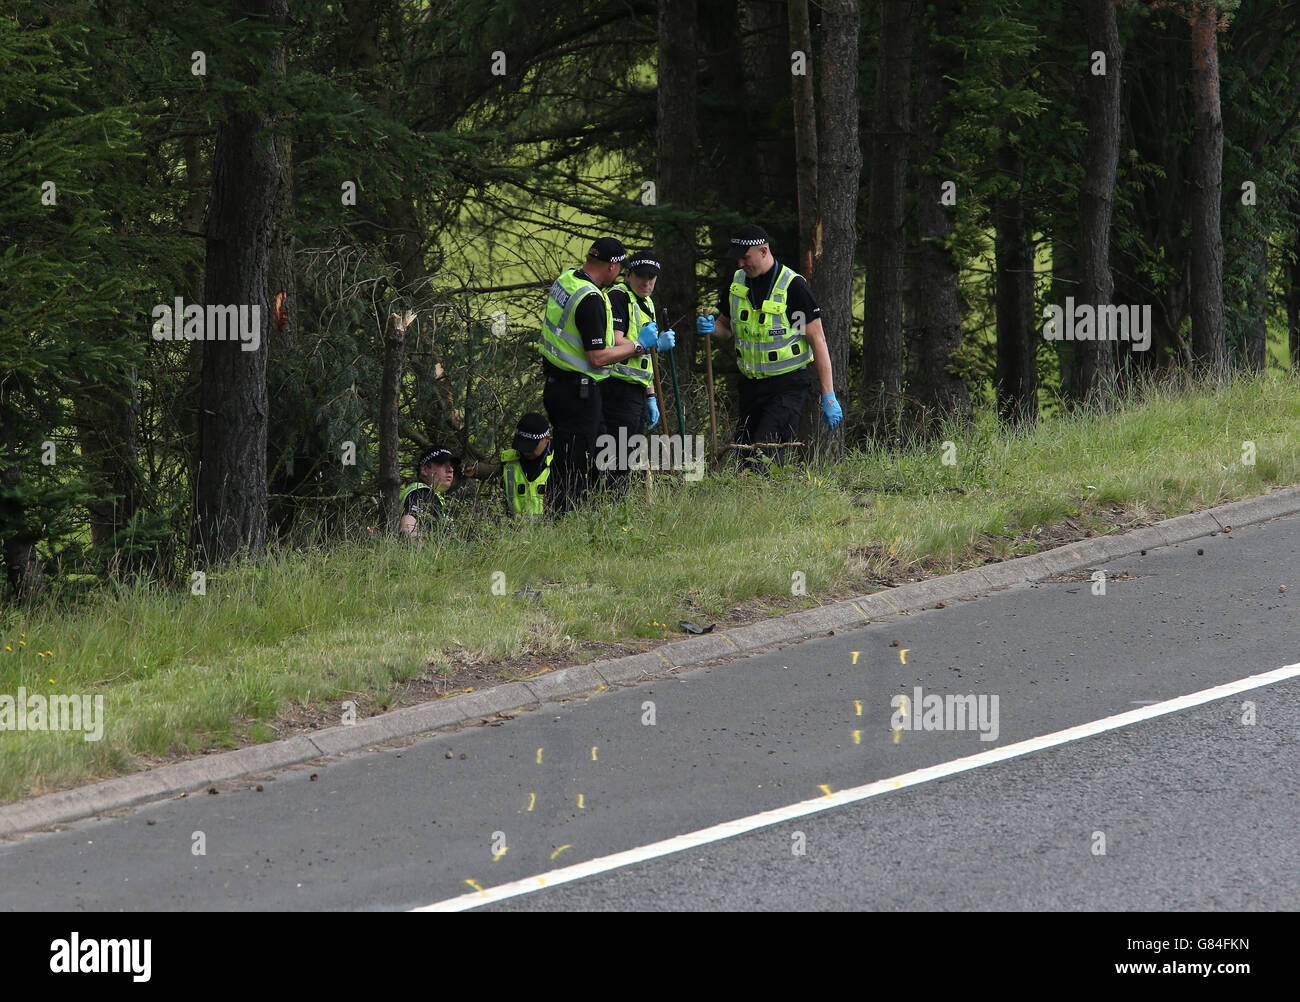 Police officers search the scene at Junction 9 of the M9 after a car was discovered yesterday off the road with the driver dead and passenger still alive. An investigation has been launched into the police failure to follow up a report of the crash which killed John Yuill, 28, and left 25-year-old Lamara Bell critically injured in hospital. Stock Photo